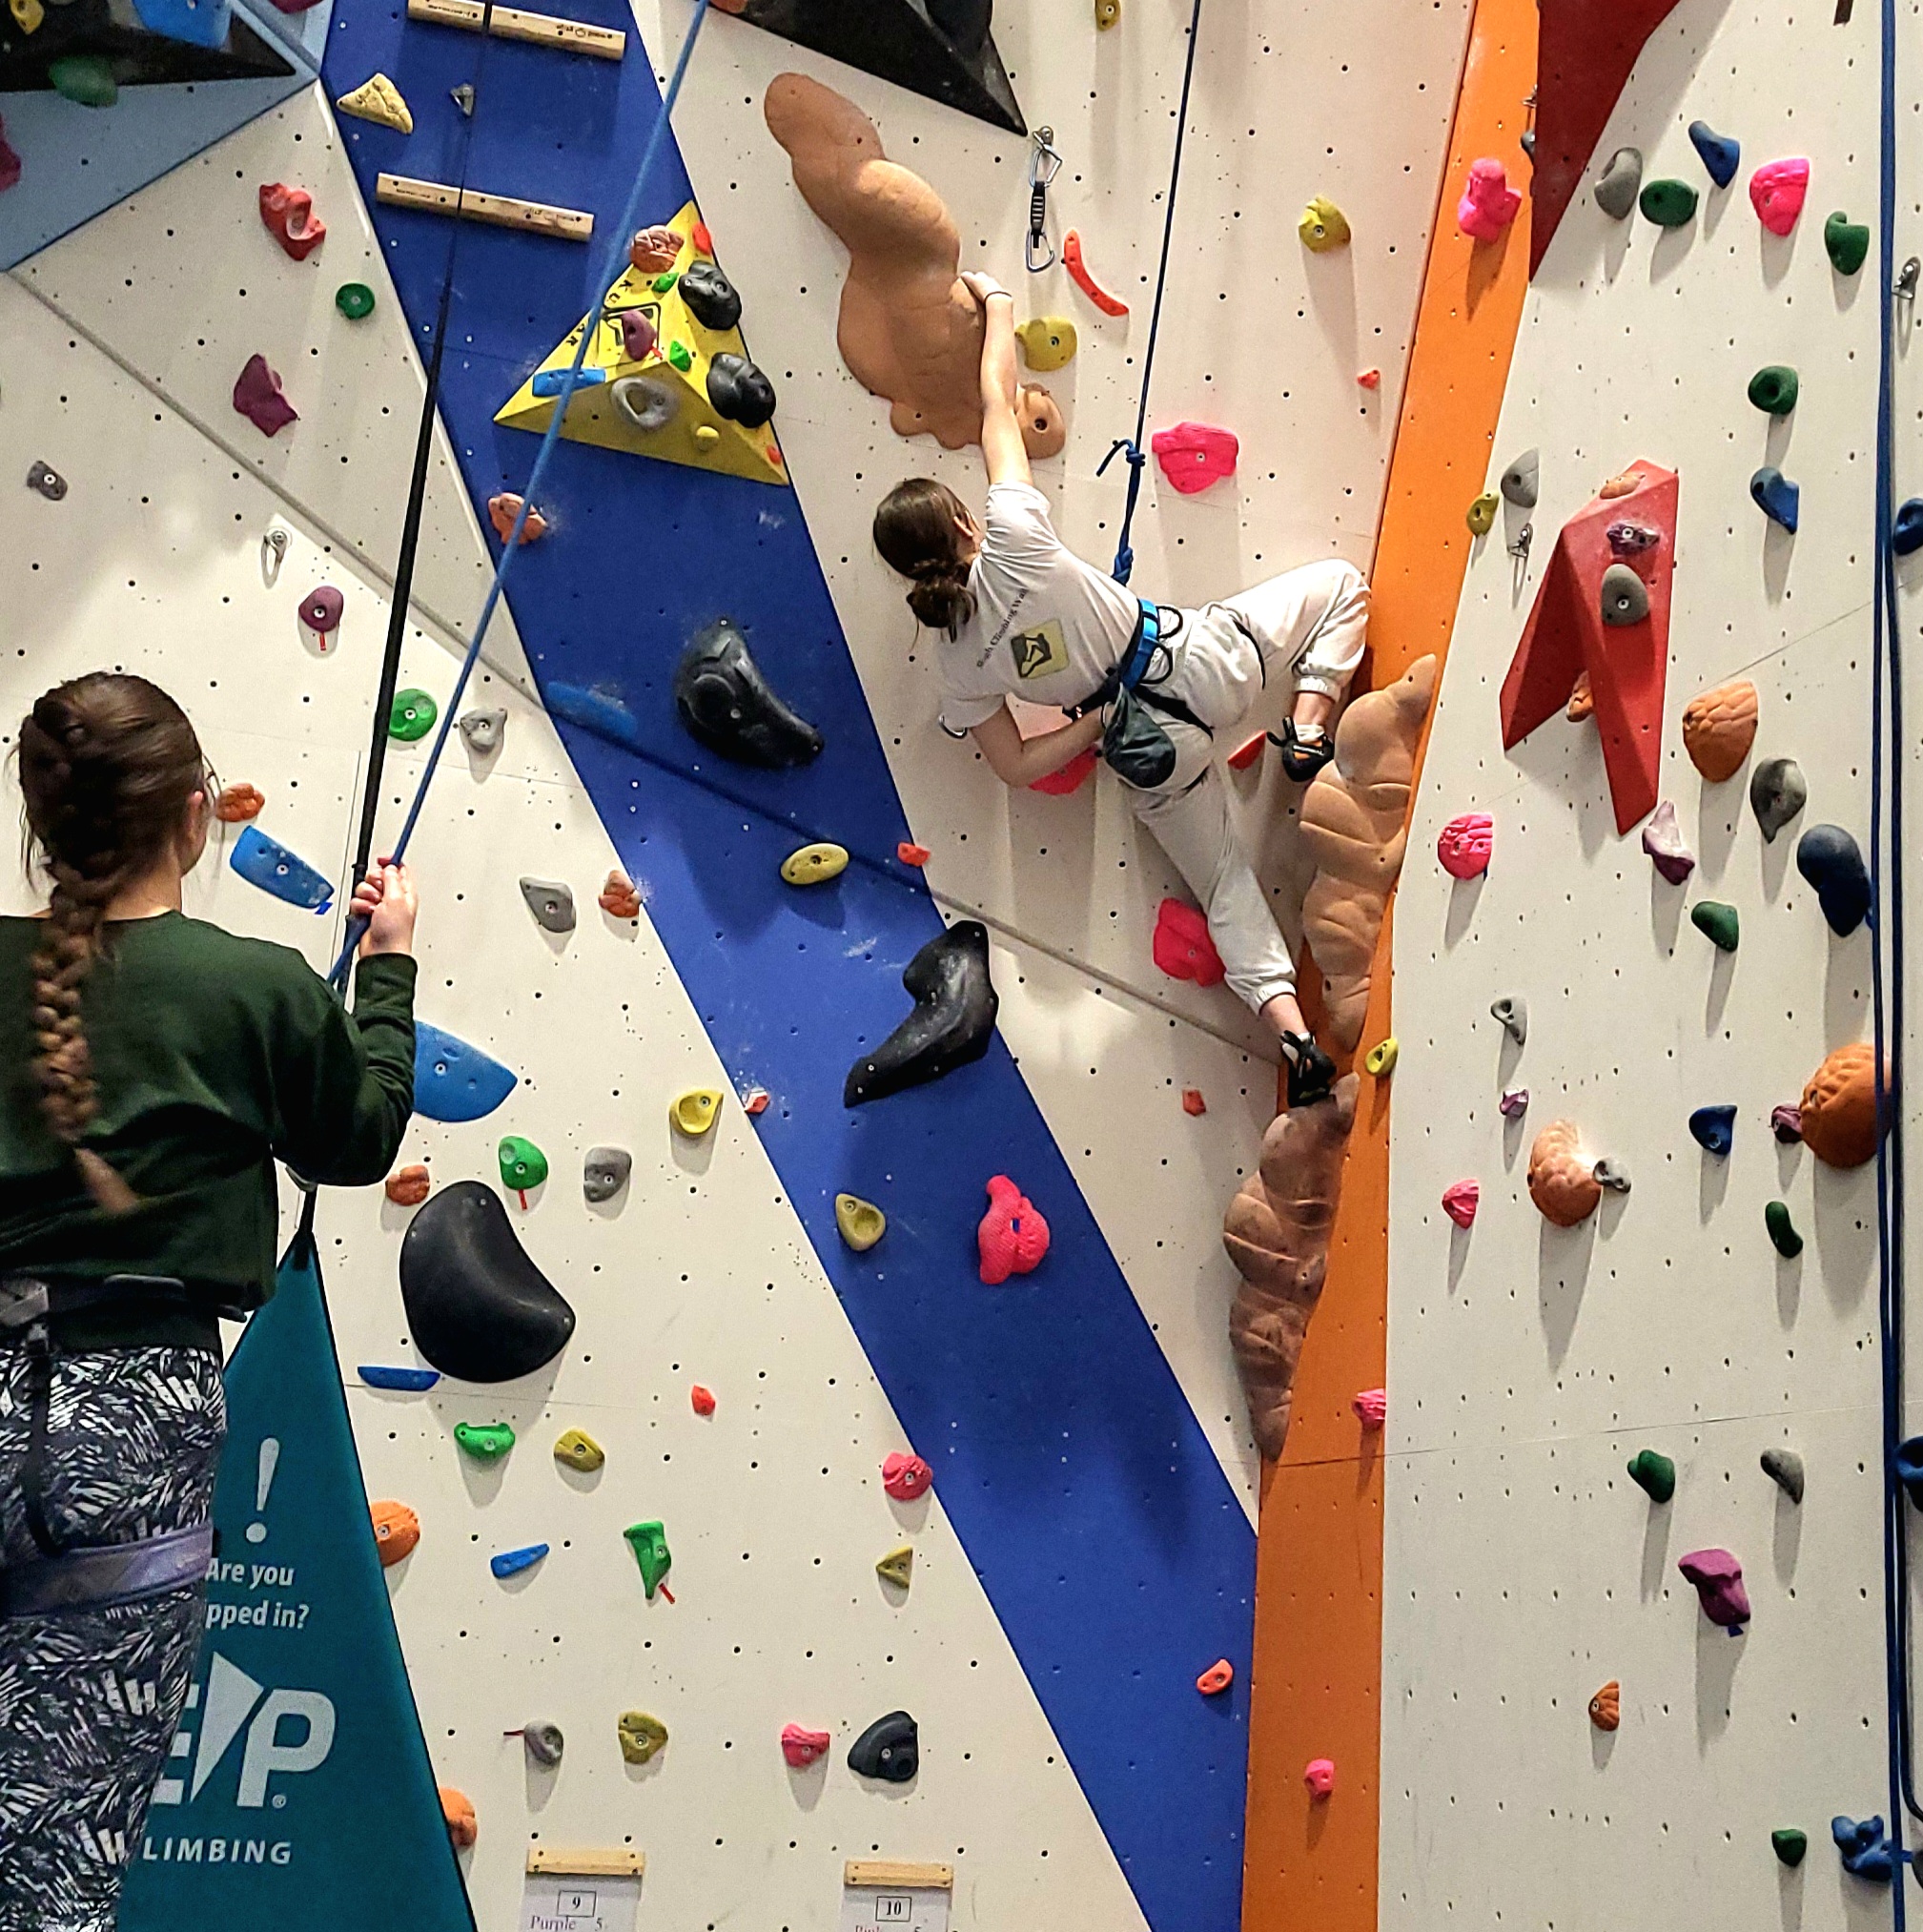 SOCIAL CLIMBING FOR TEENAGERS